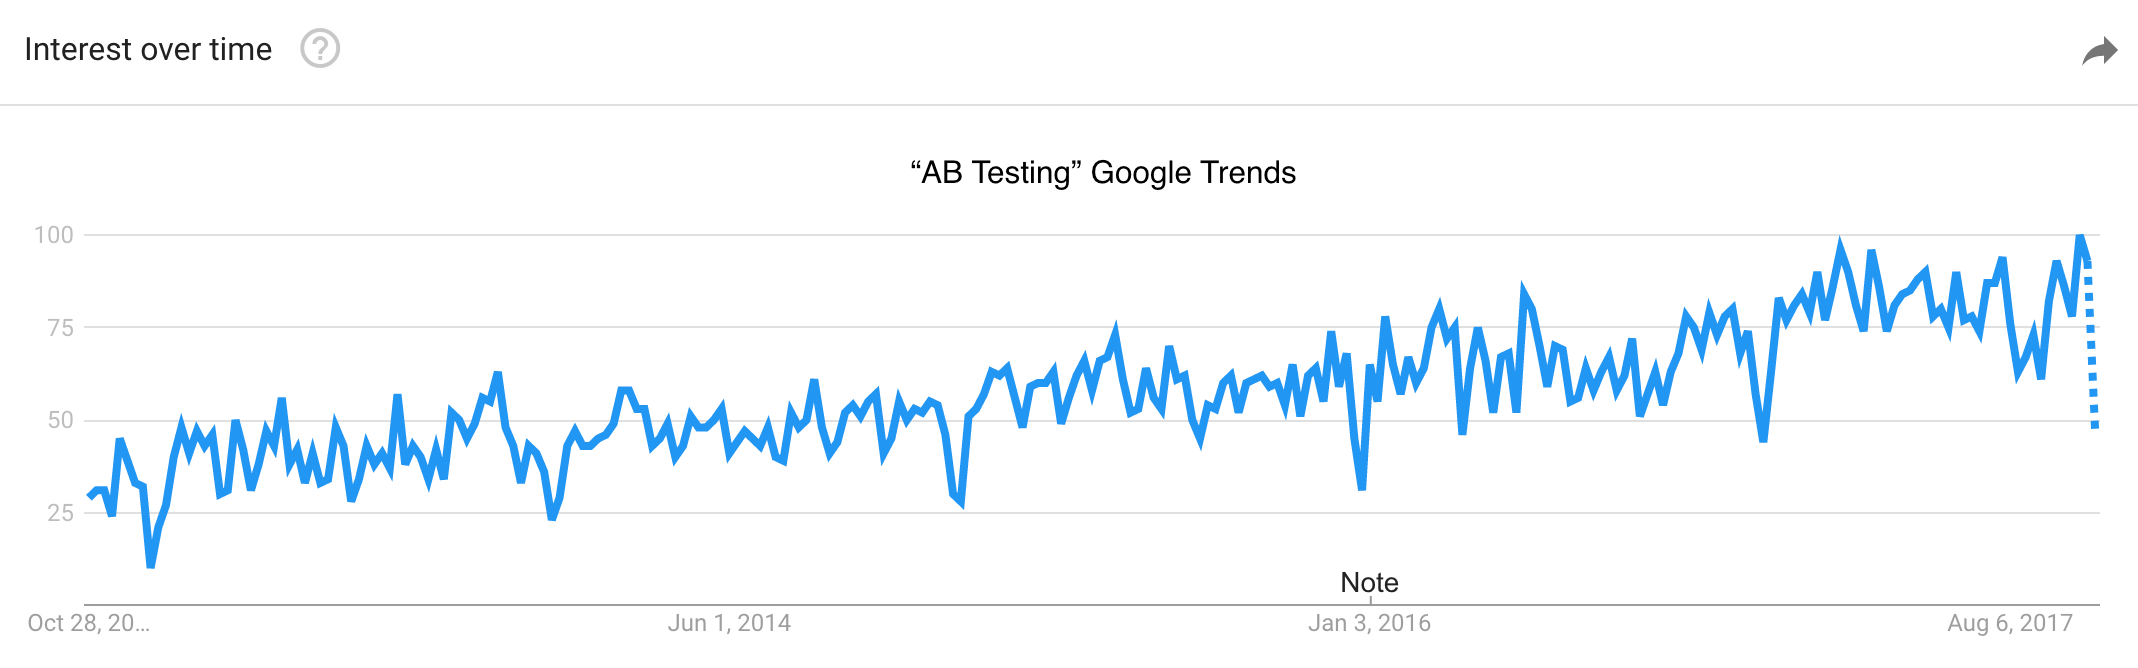 Figure 1. Google Trends time series for the query 'AB Testing', showing increased interest between October 2012 and October 2017.